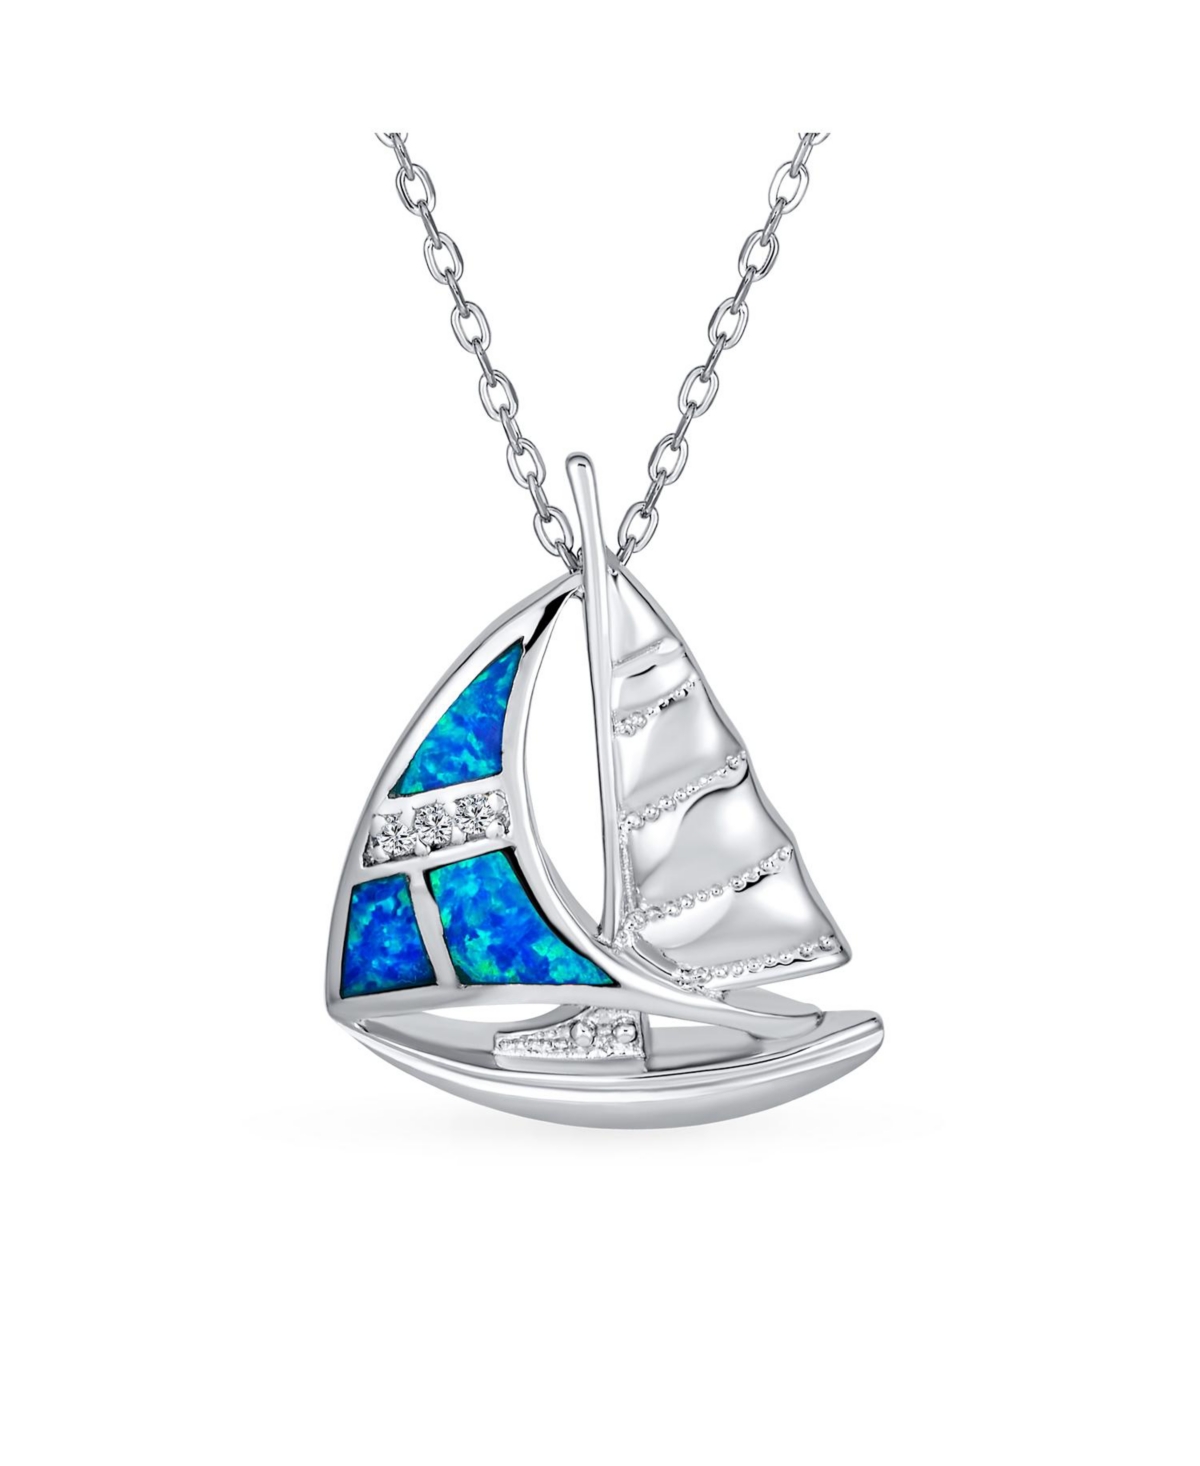 Gemstone Nautical Boat Summer Caribbean Vacation Ship Sailor Created Blue Opal Sailboat Necklace Pendant For Women .925 Sterling Silver Large - Blue